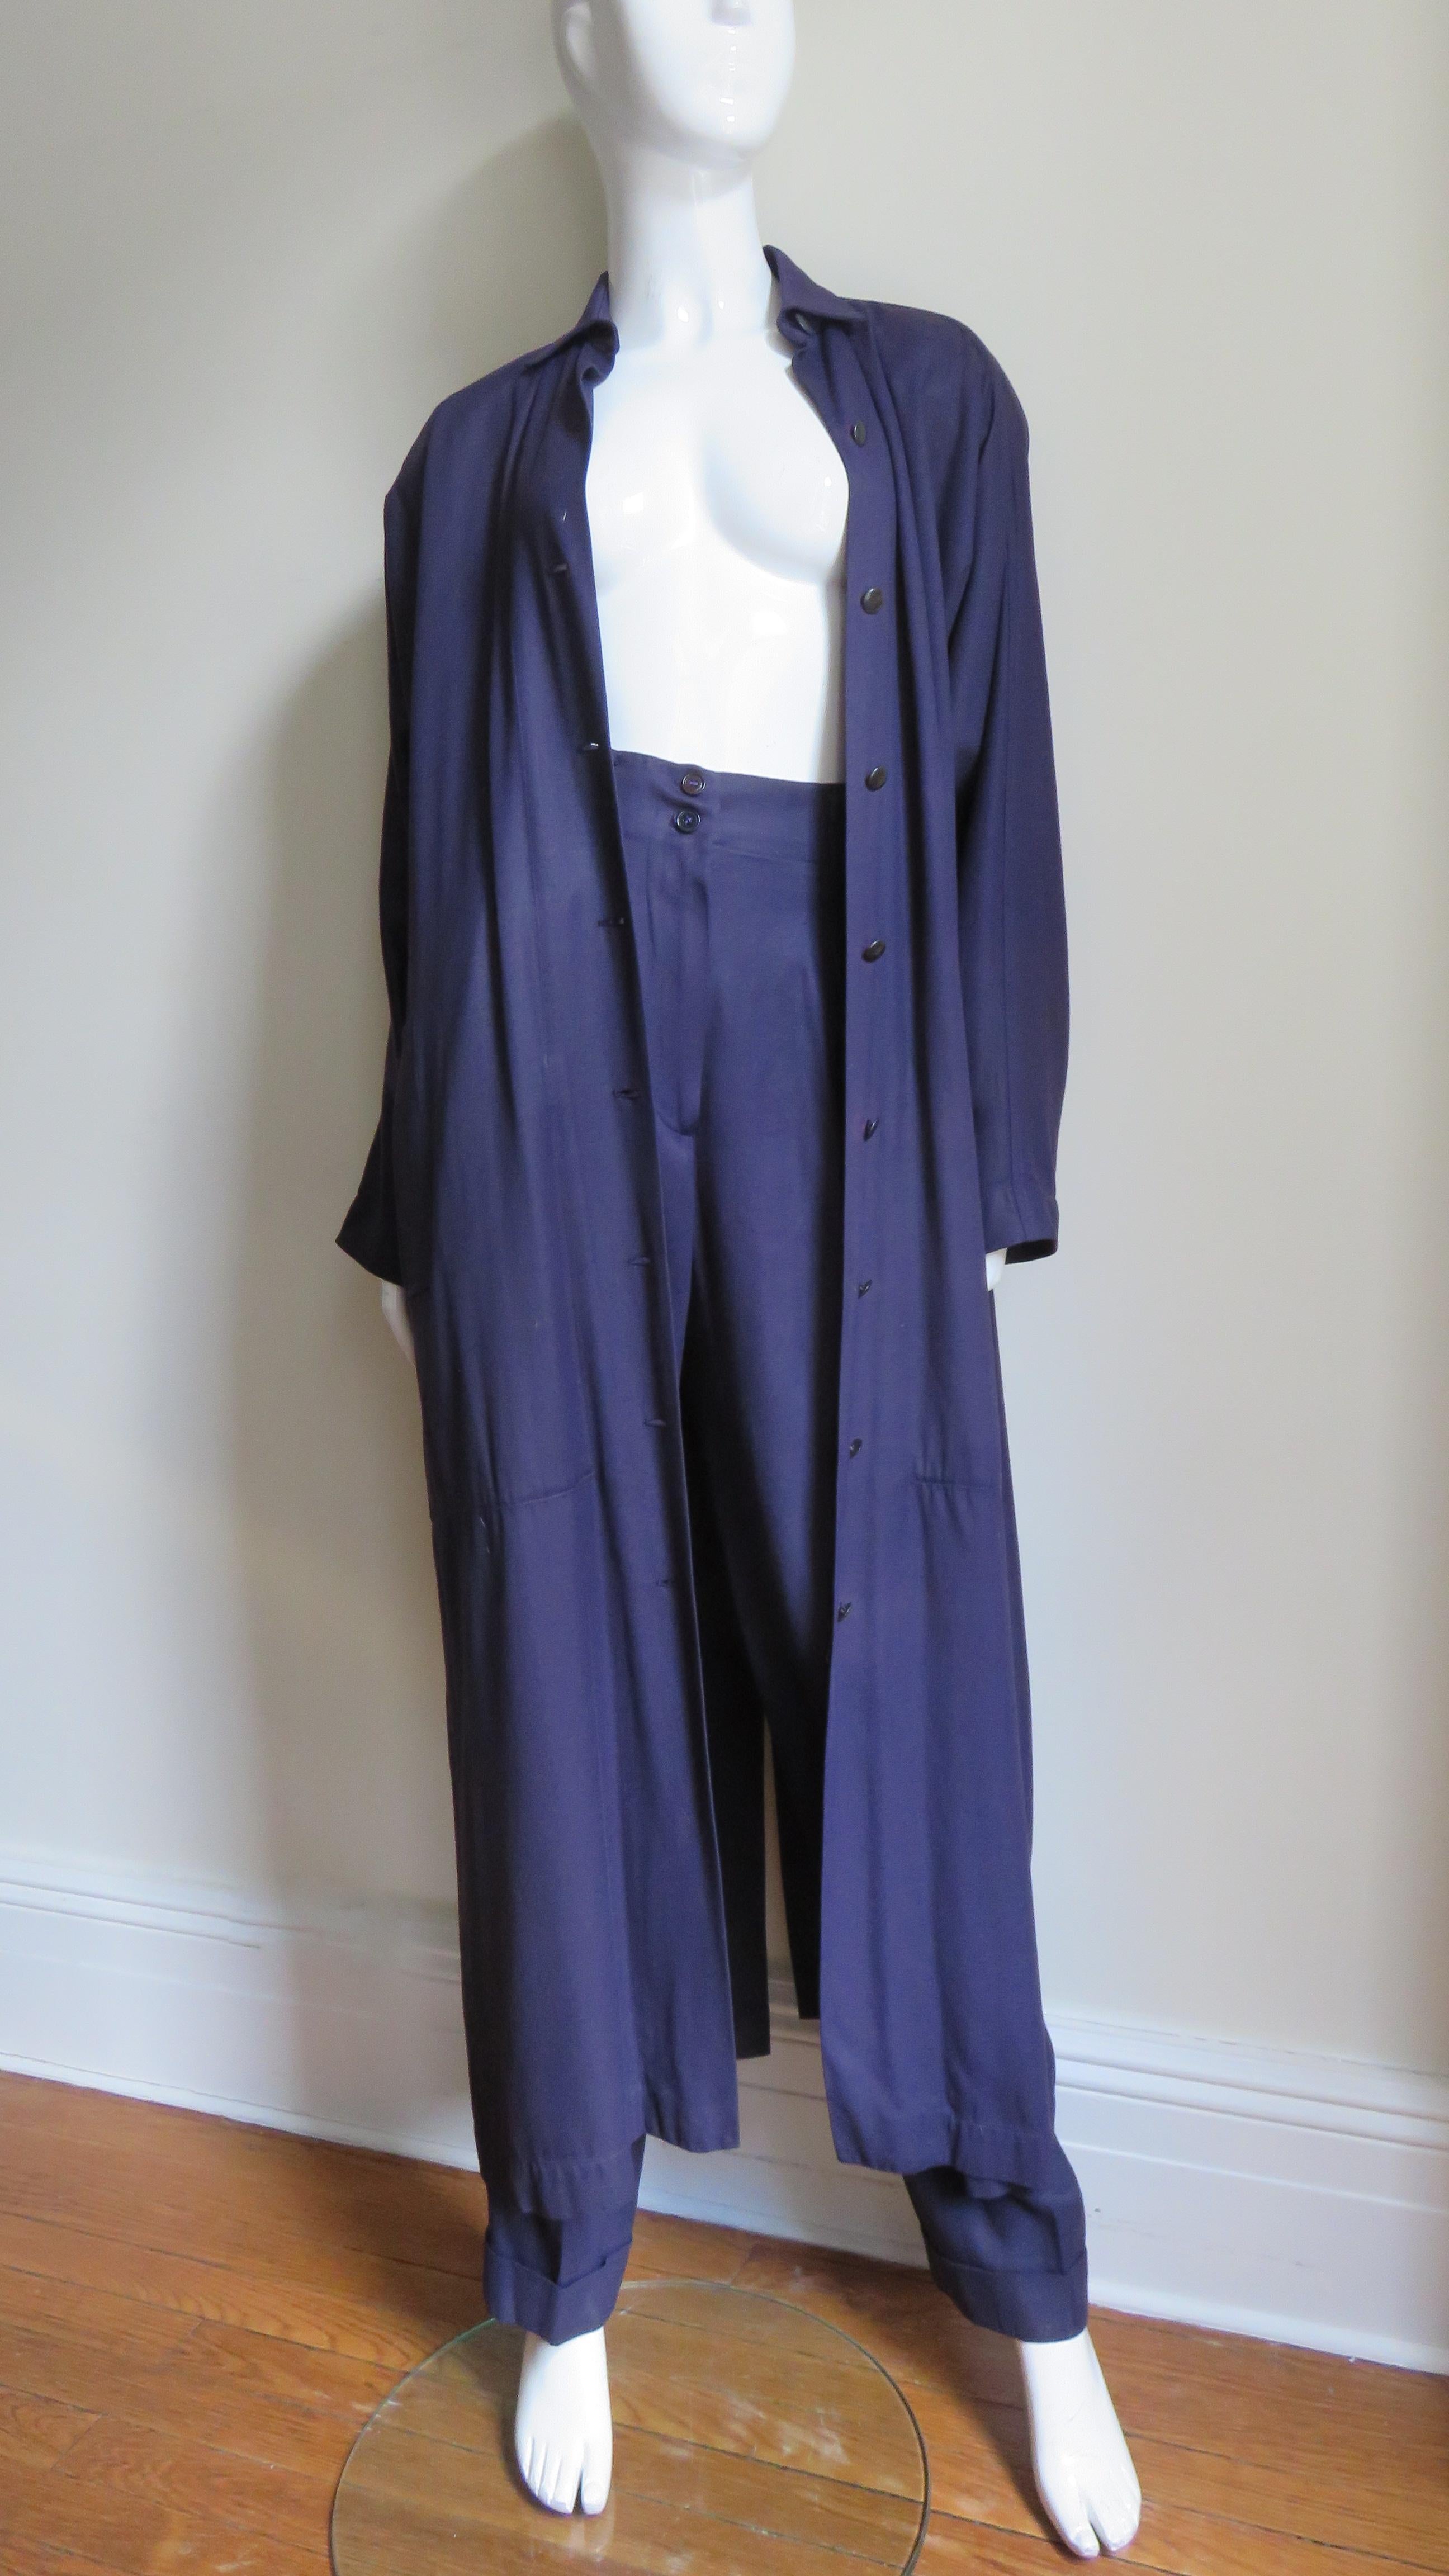 A fabulous eggplant purple long coat and pants set from Azzedine Alaia.  The long duster coat has a collar, black metal buttons up the front, padded shoulders, dolman sleeves, side seam pockets and a deep slit at the back hem.  The pants have full